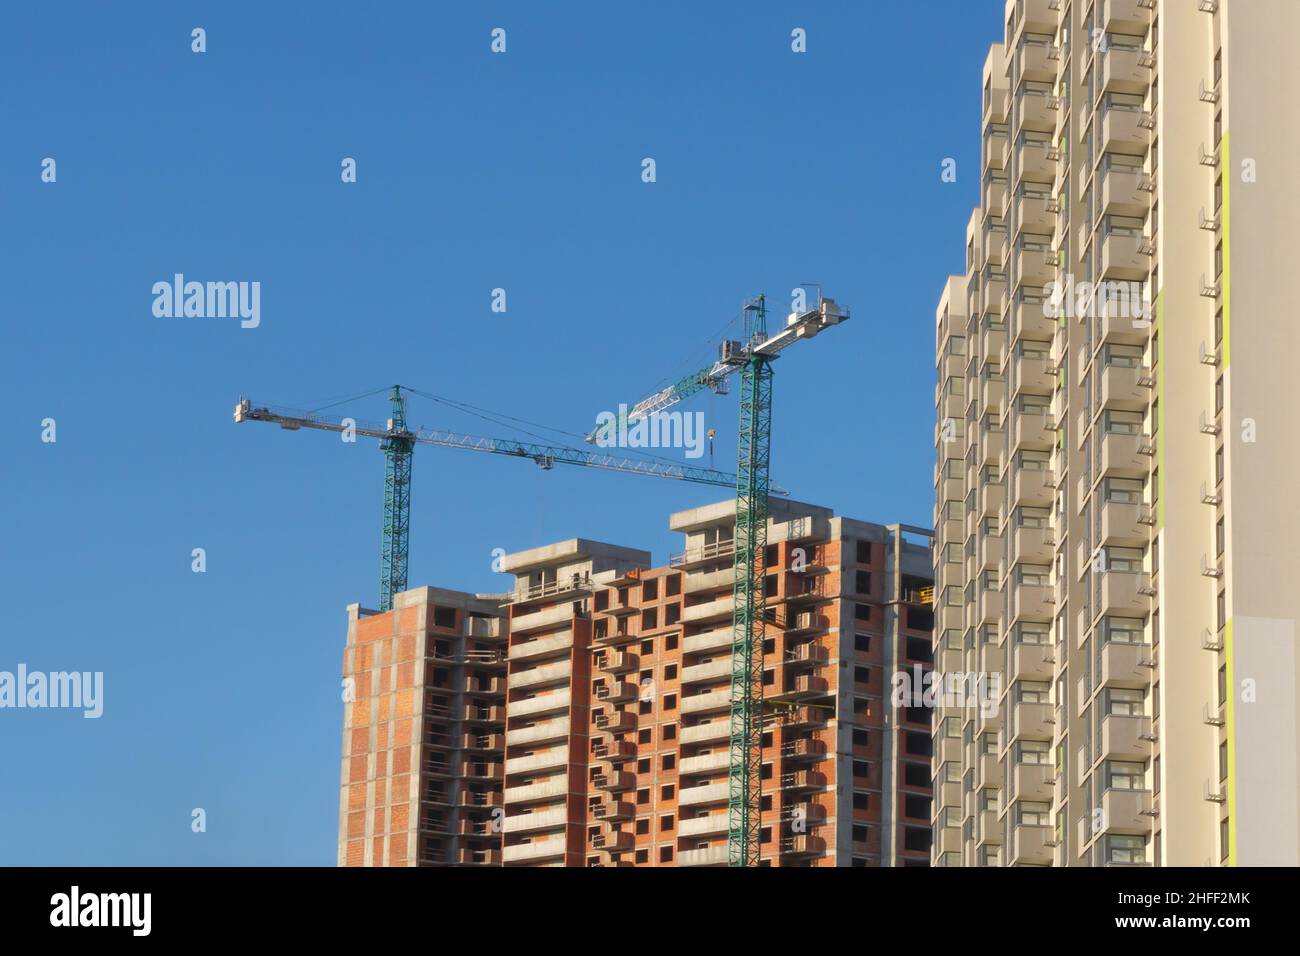 New building construction background clear blue sky. Multistory house. Mortgage. Tower cranes construction site building company property investment Stock Photo